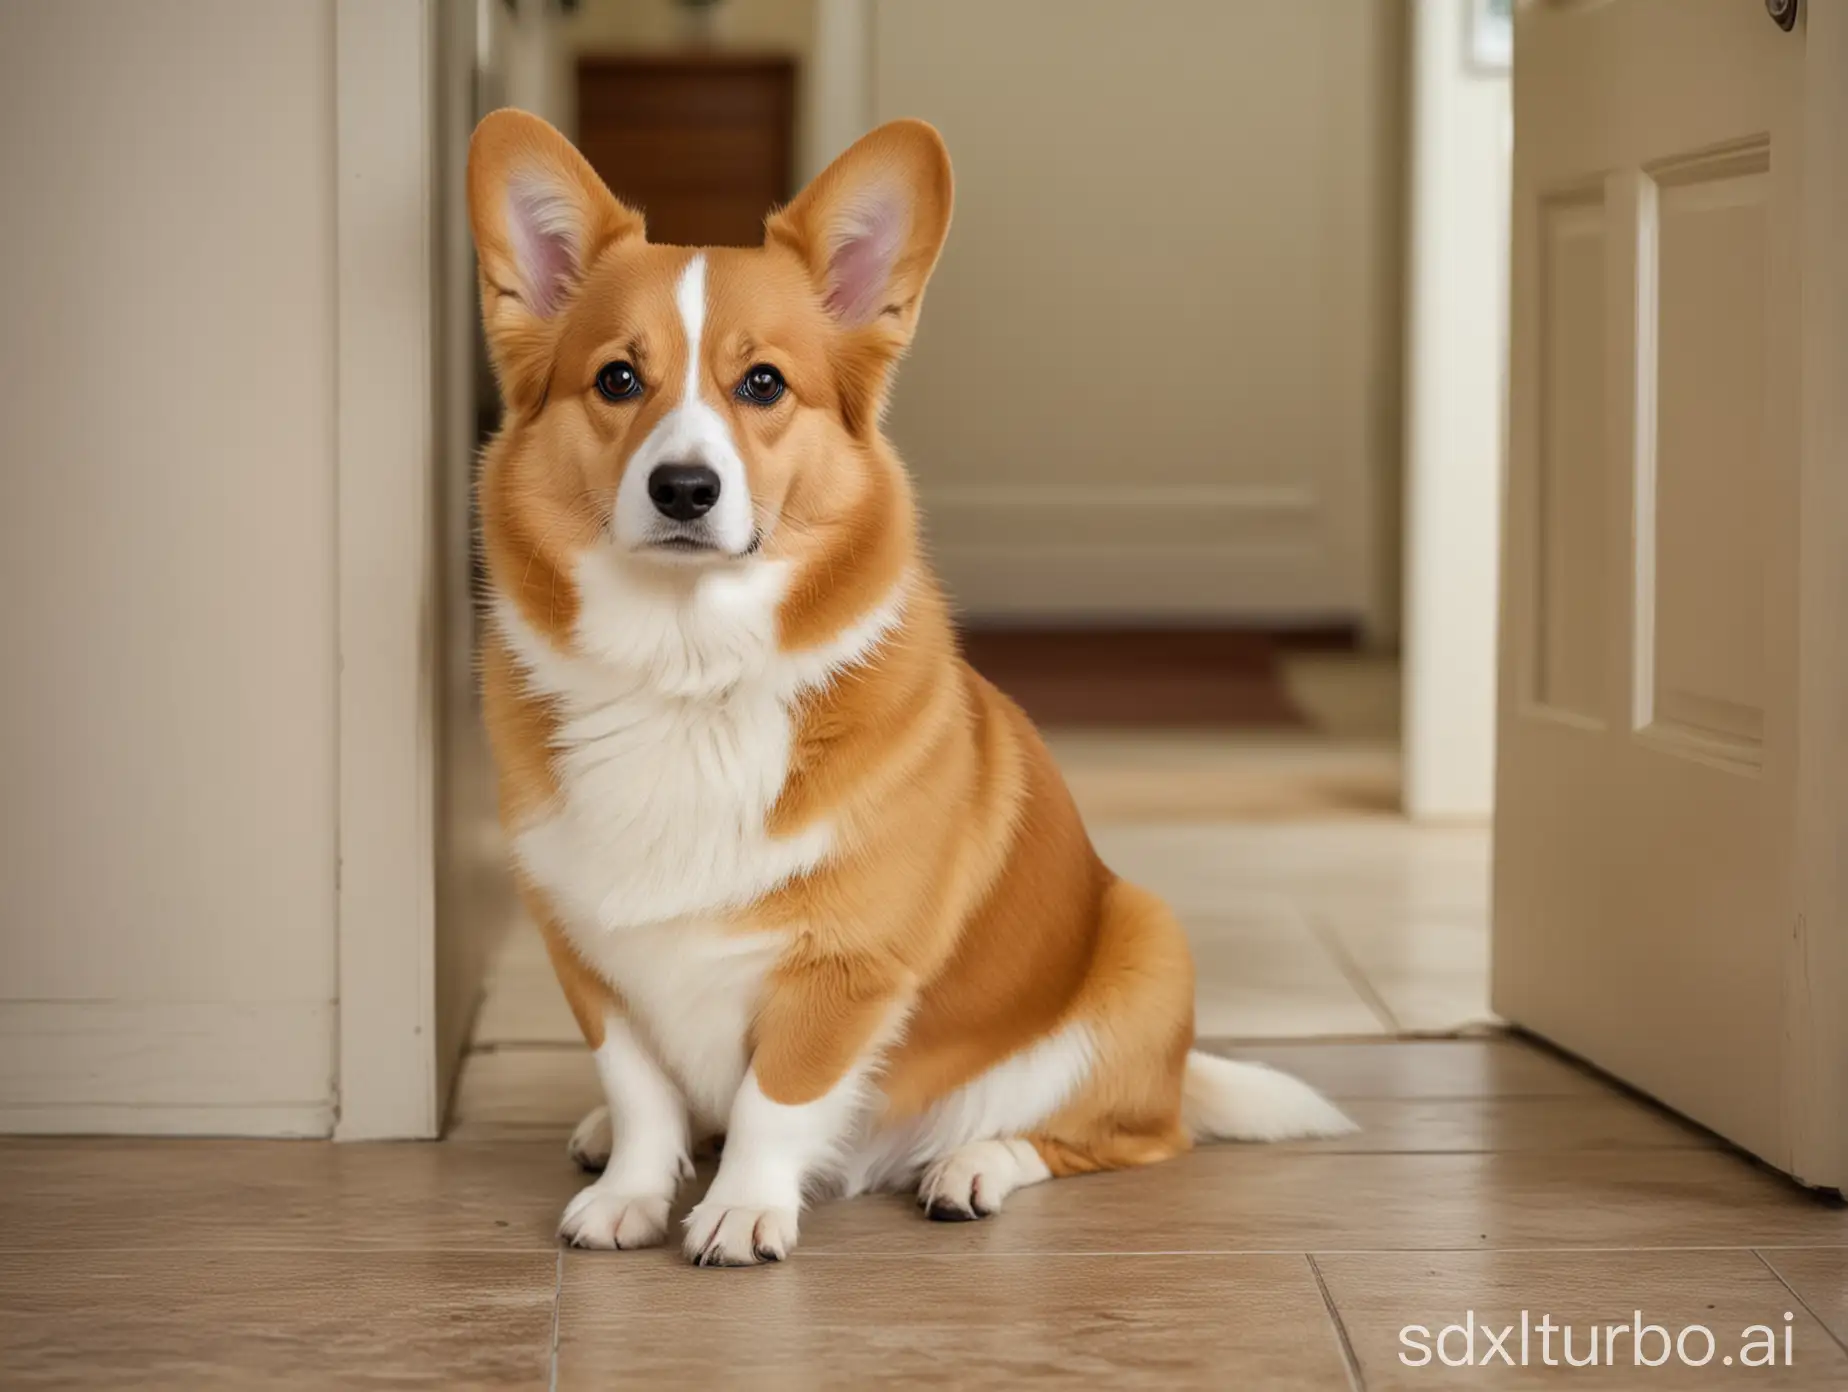 Adorable-Corgi-Waiting-Patiently-by-the-Door